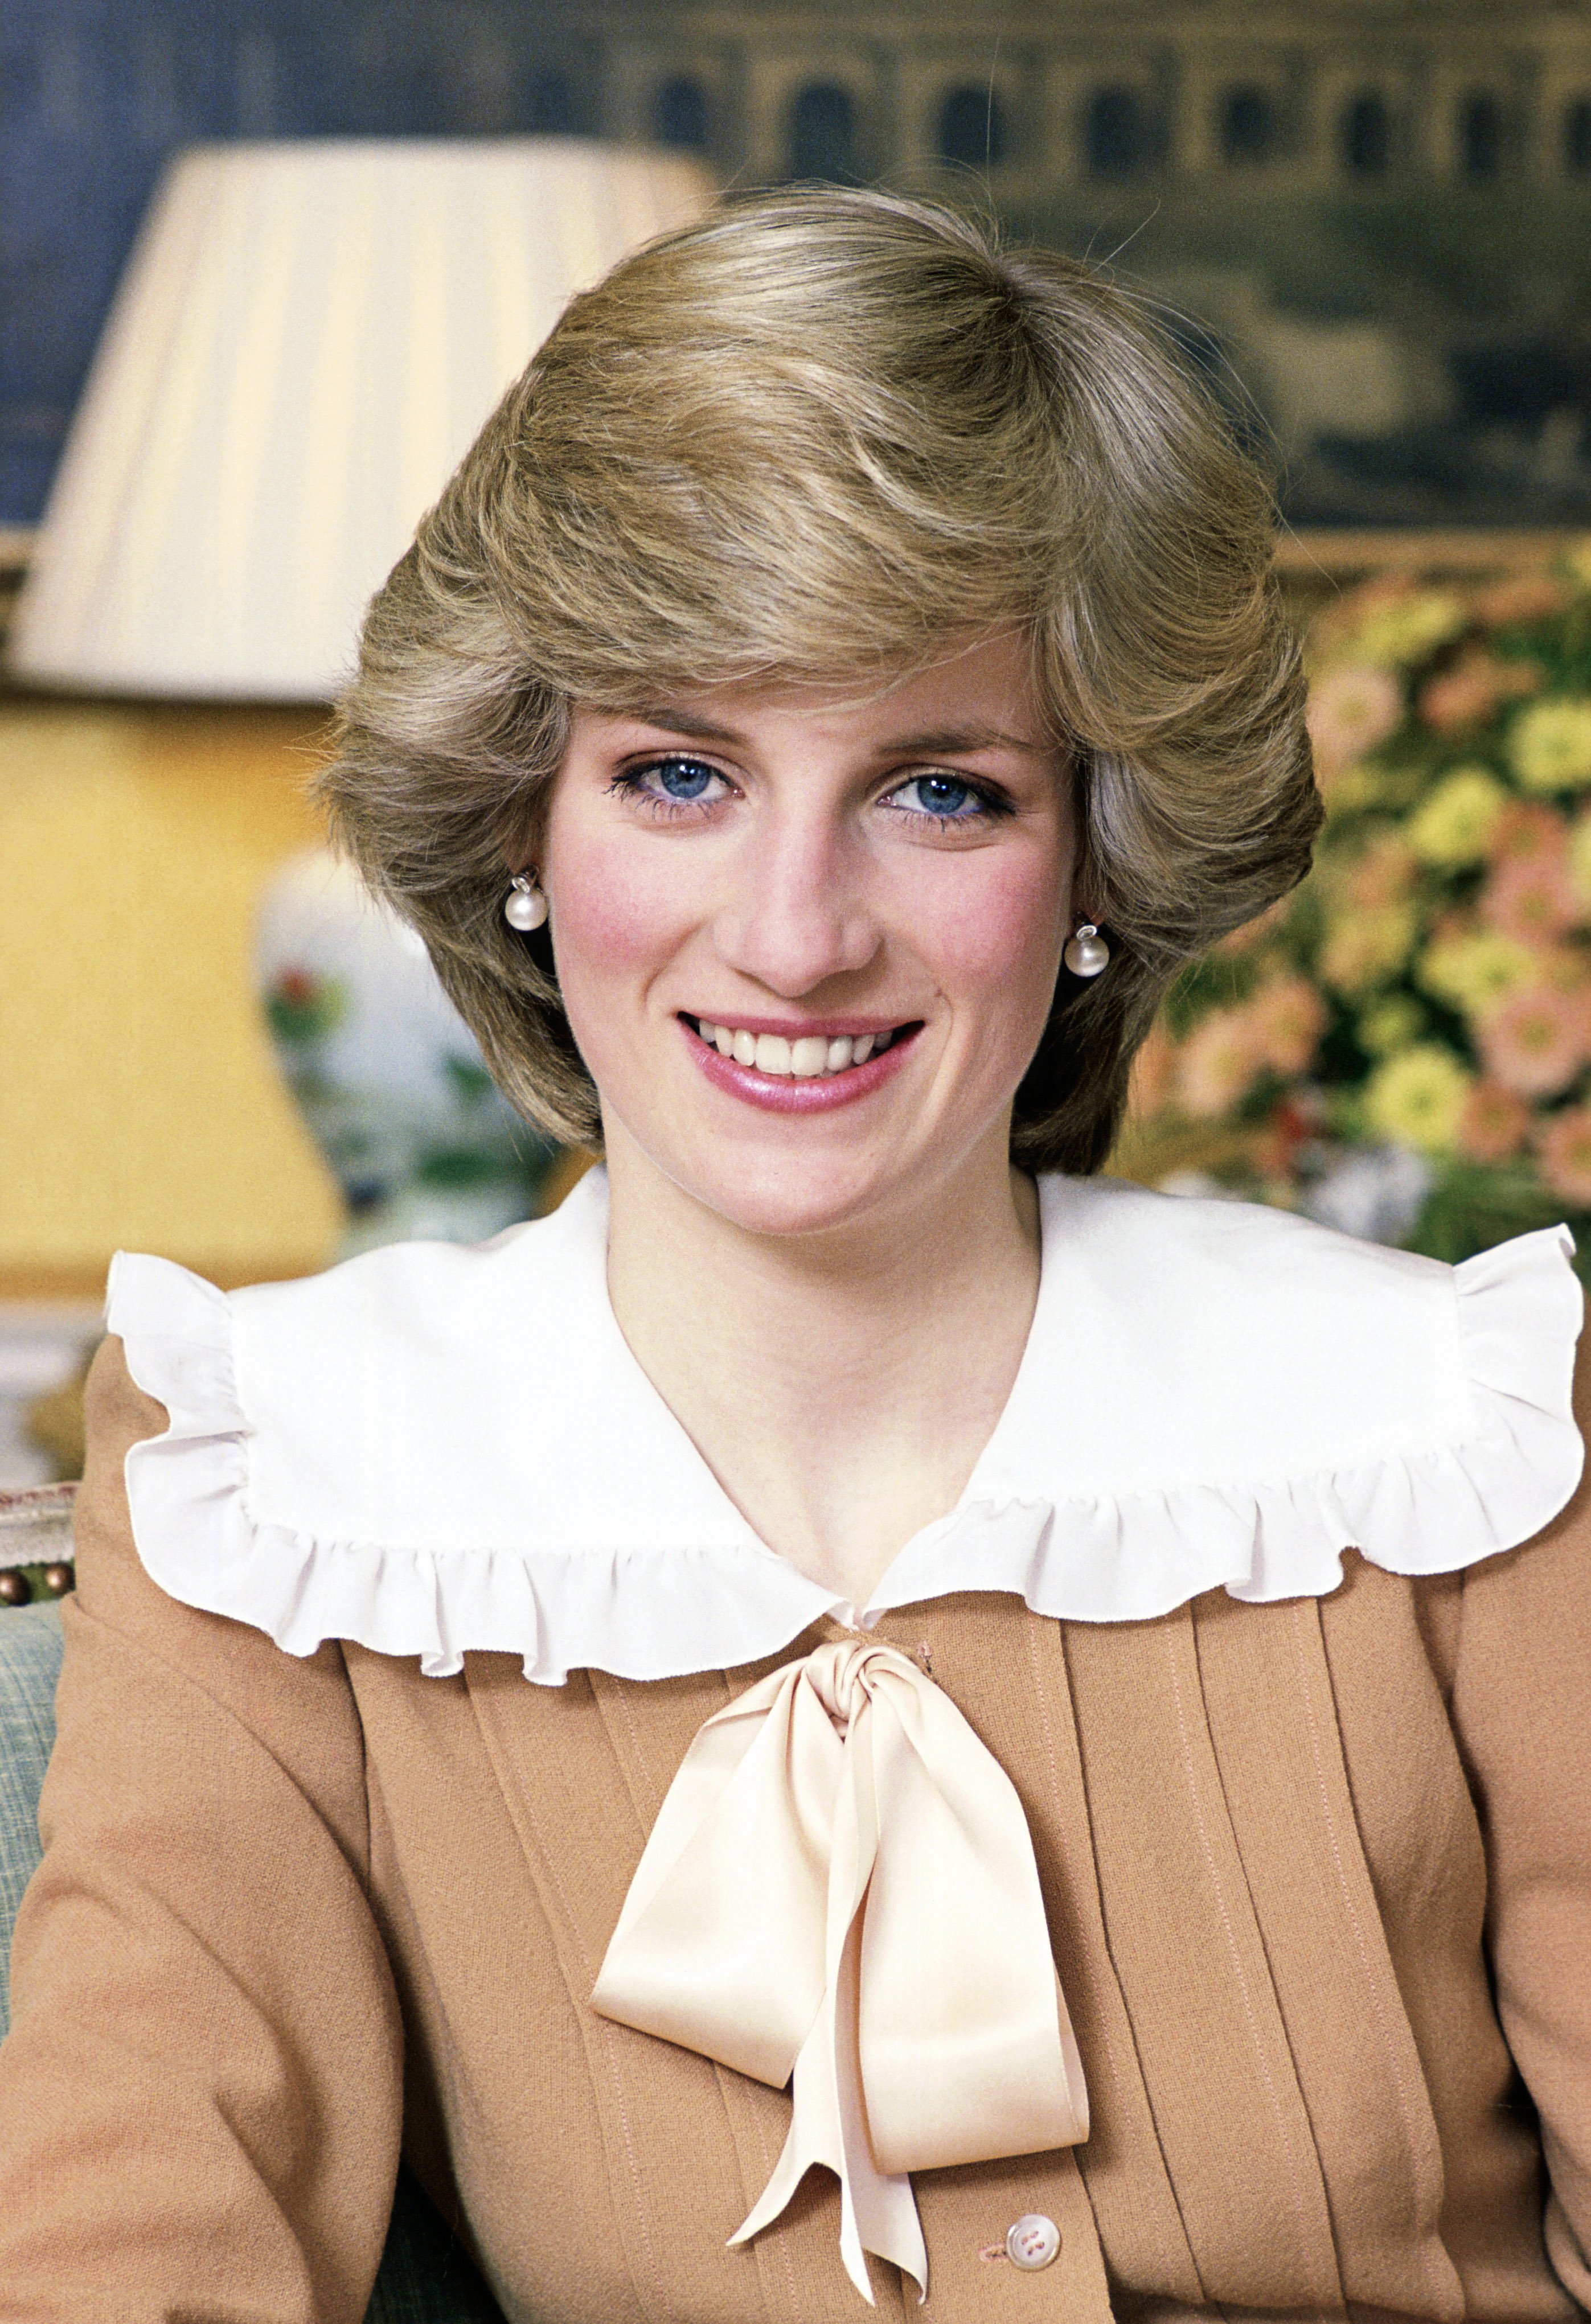 A portrait of Princess Diana at her home in Kensington Palace, London, United Kingdom ┃Source: Getty Images